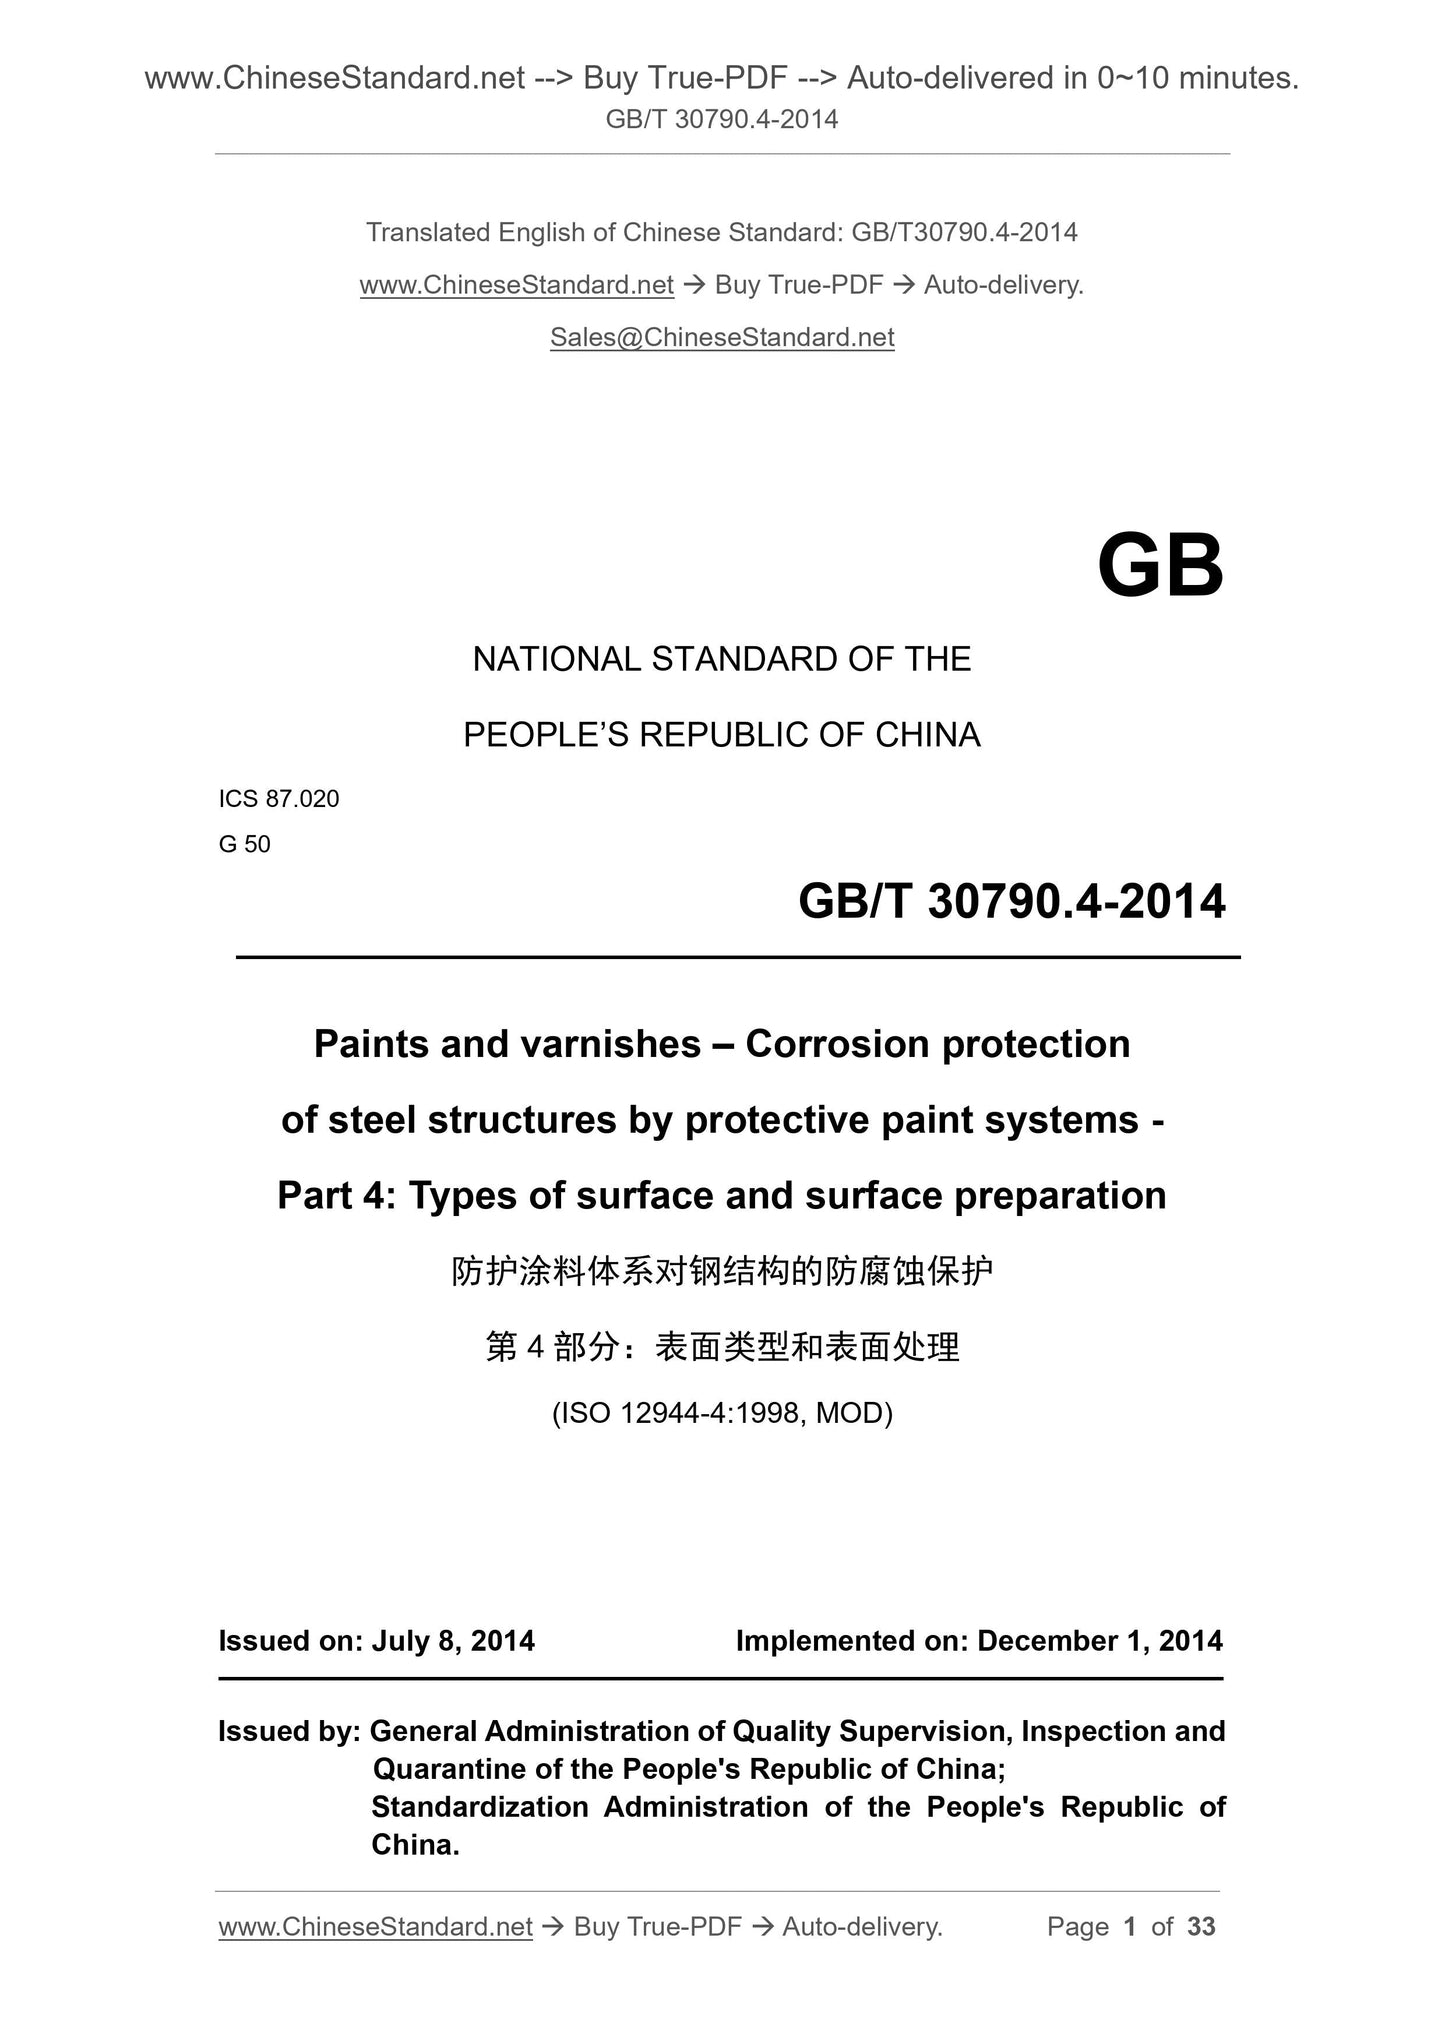 GB/T 30790.4-2014 Page 1